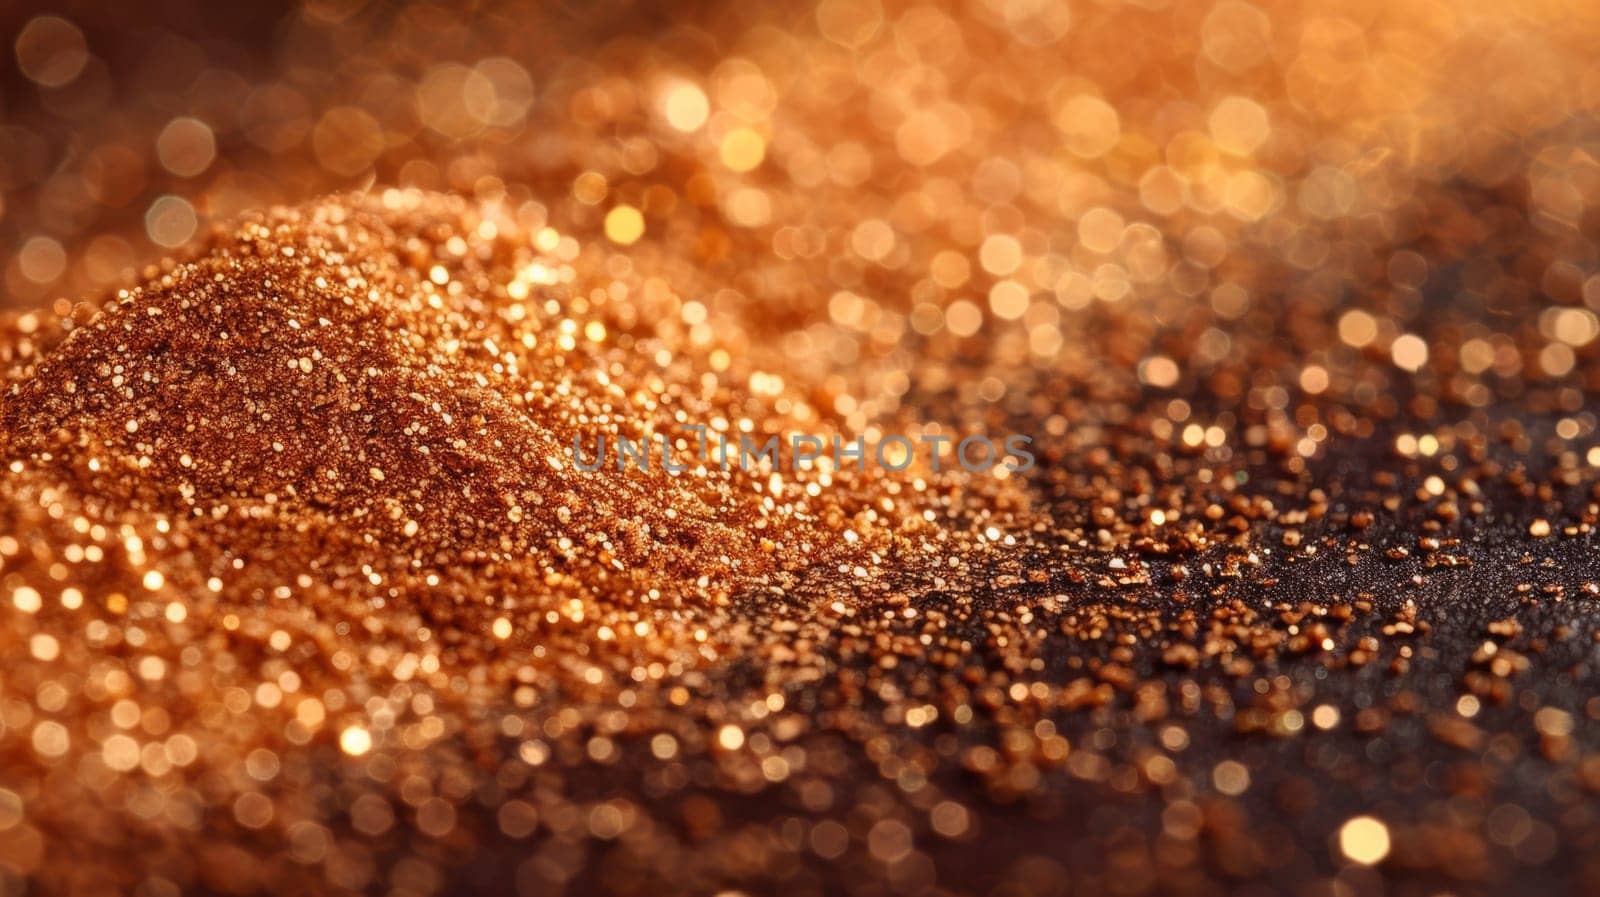 A close up of a pile of gold glitter on top of some sand